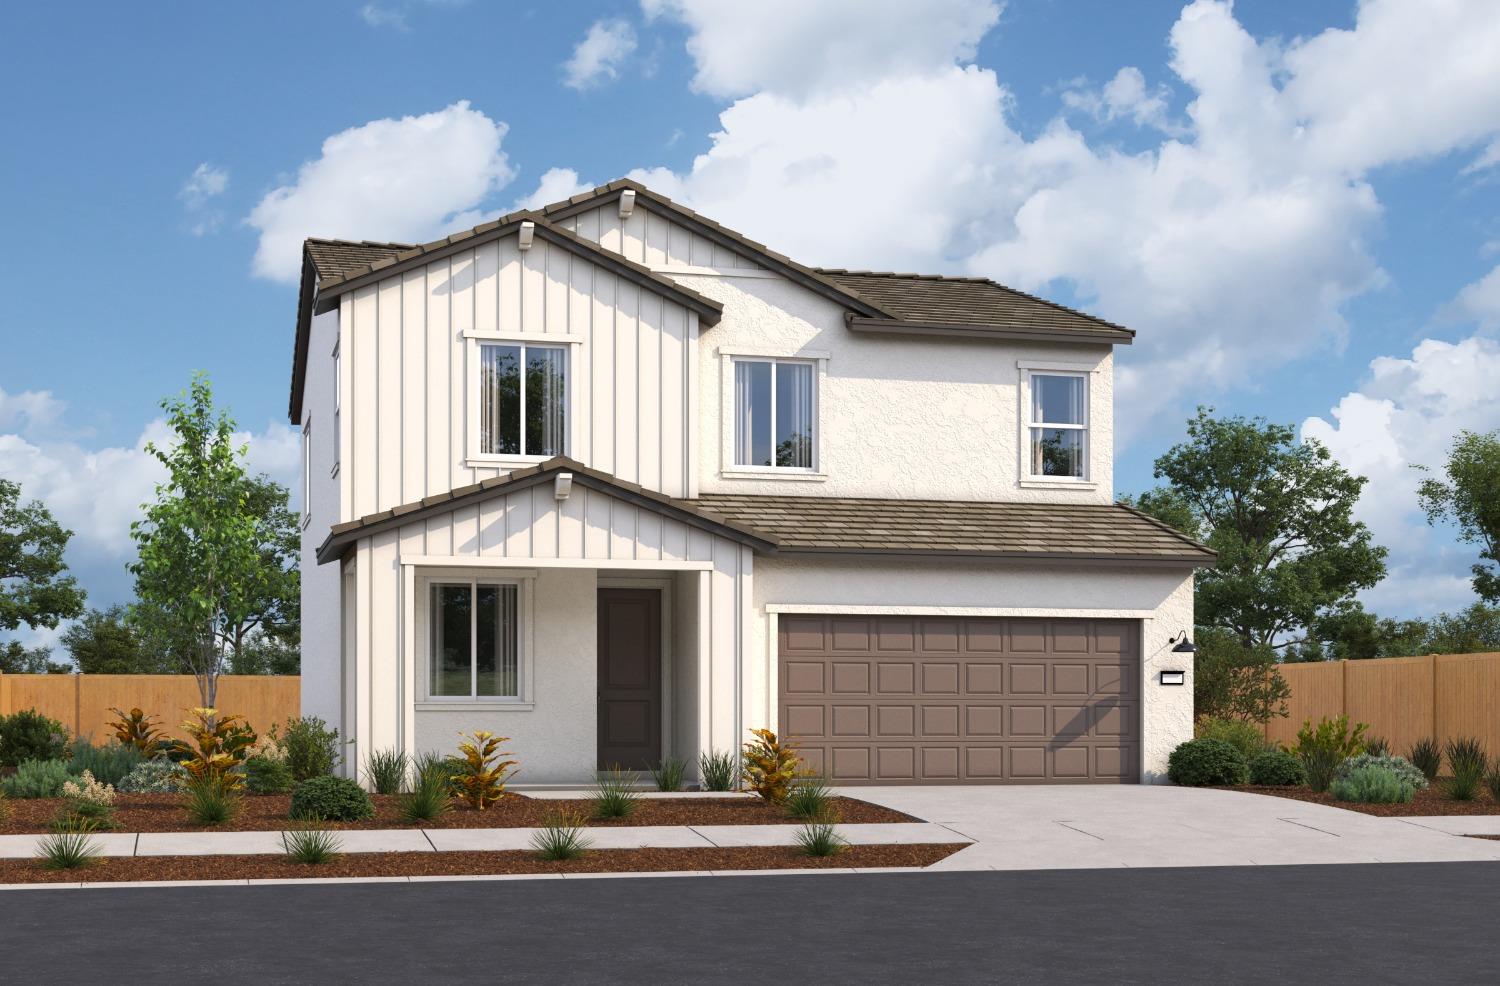 Photo of 8049 Moongate Wy in Roseville, CA